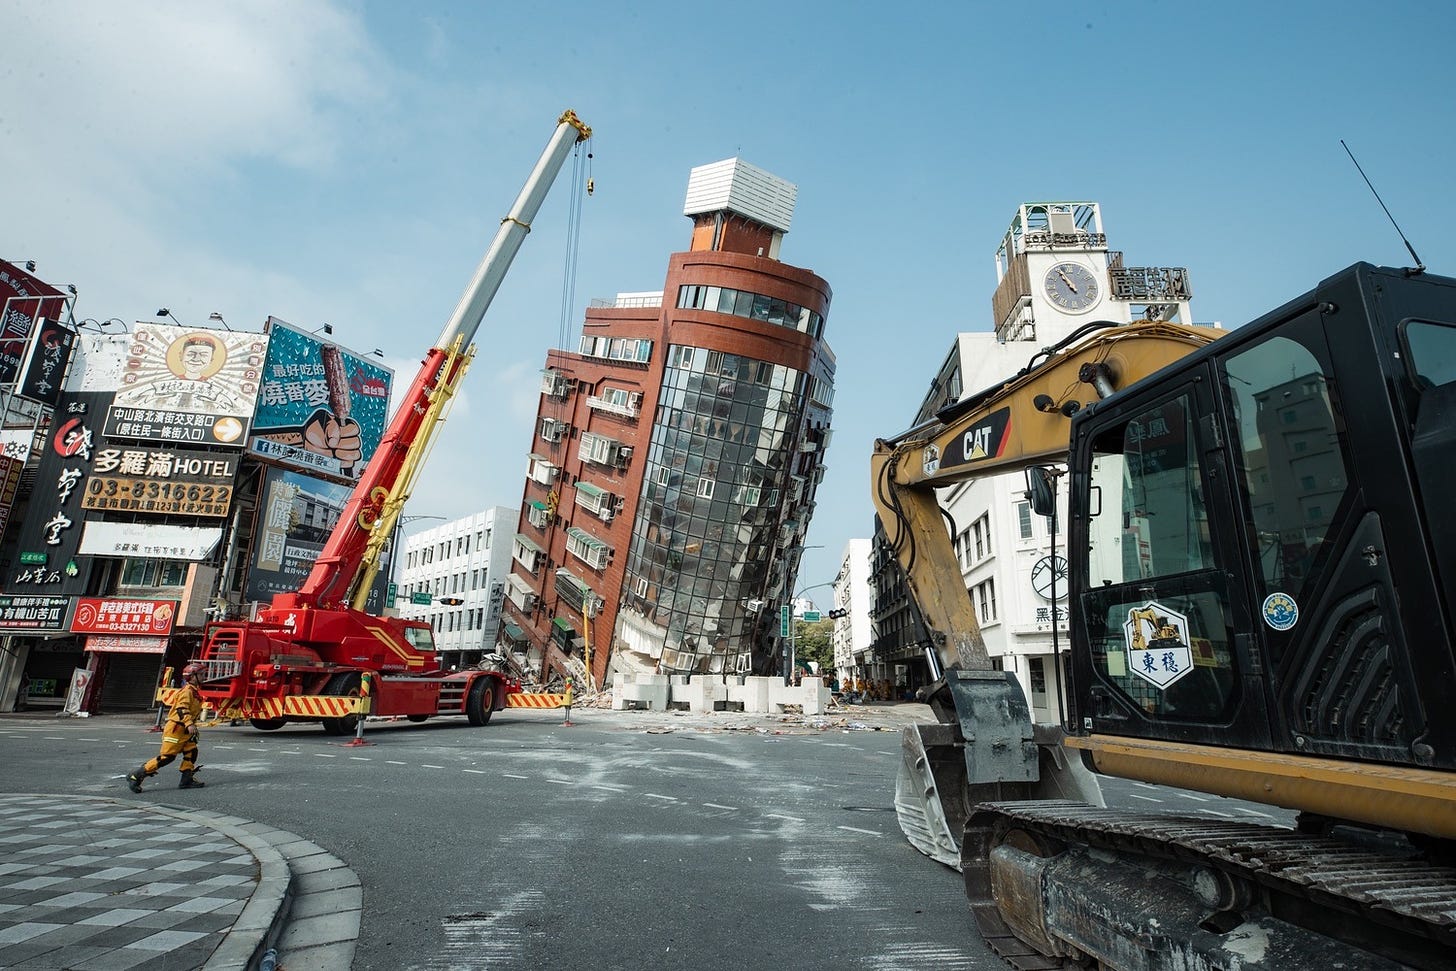 Earthquake Hits Taiwan: How Strict Building Codes Averted a Larger Disaster - Image 1 of 4